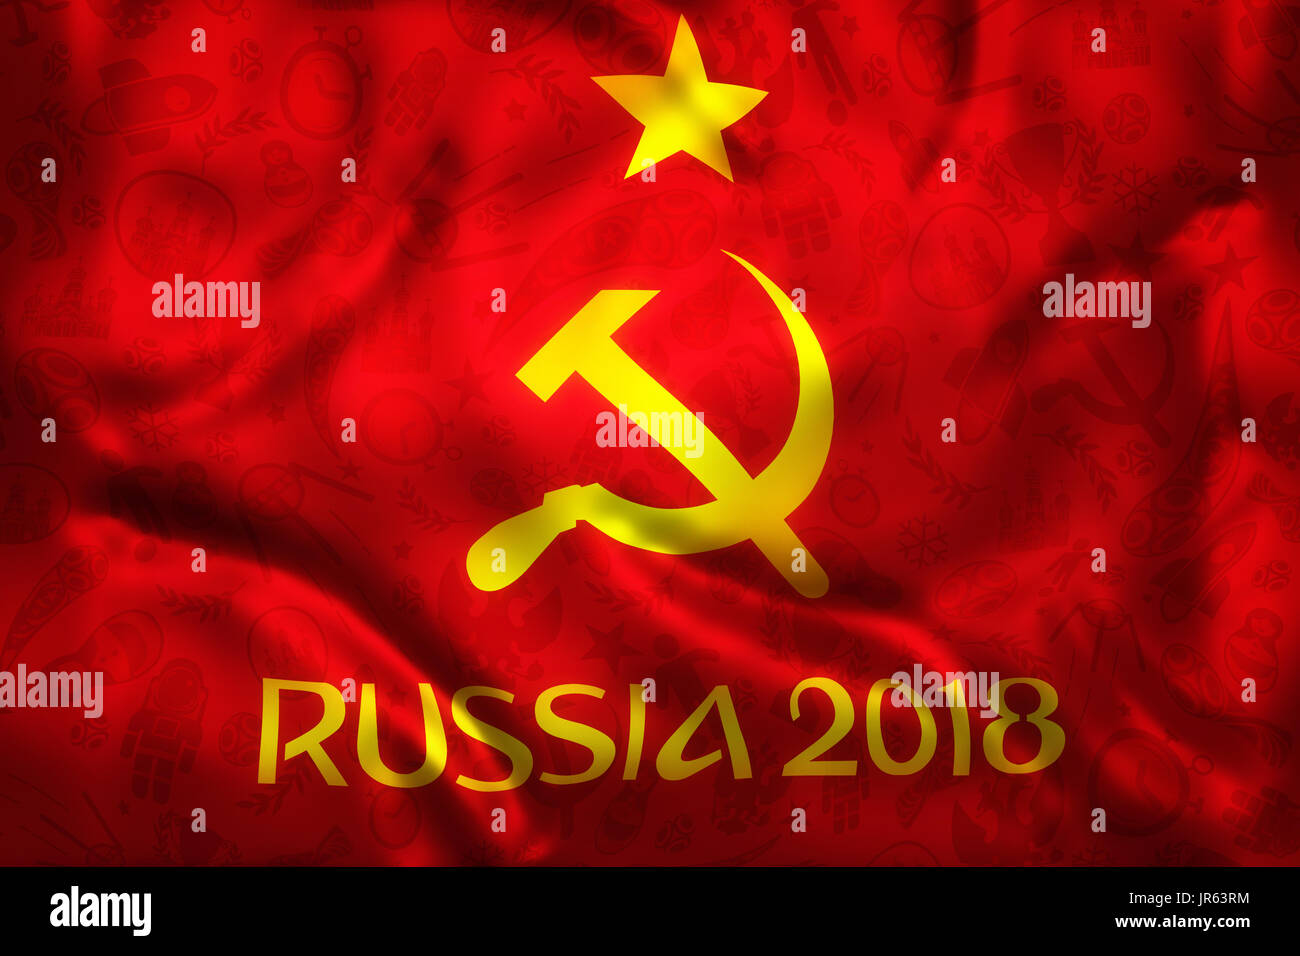 World  Football 2018 Russia Tournament Symbal on a Red Wrinkled Flag Stock Photo